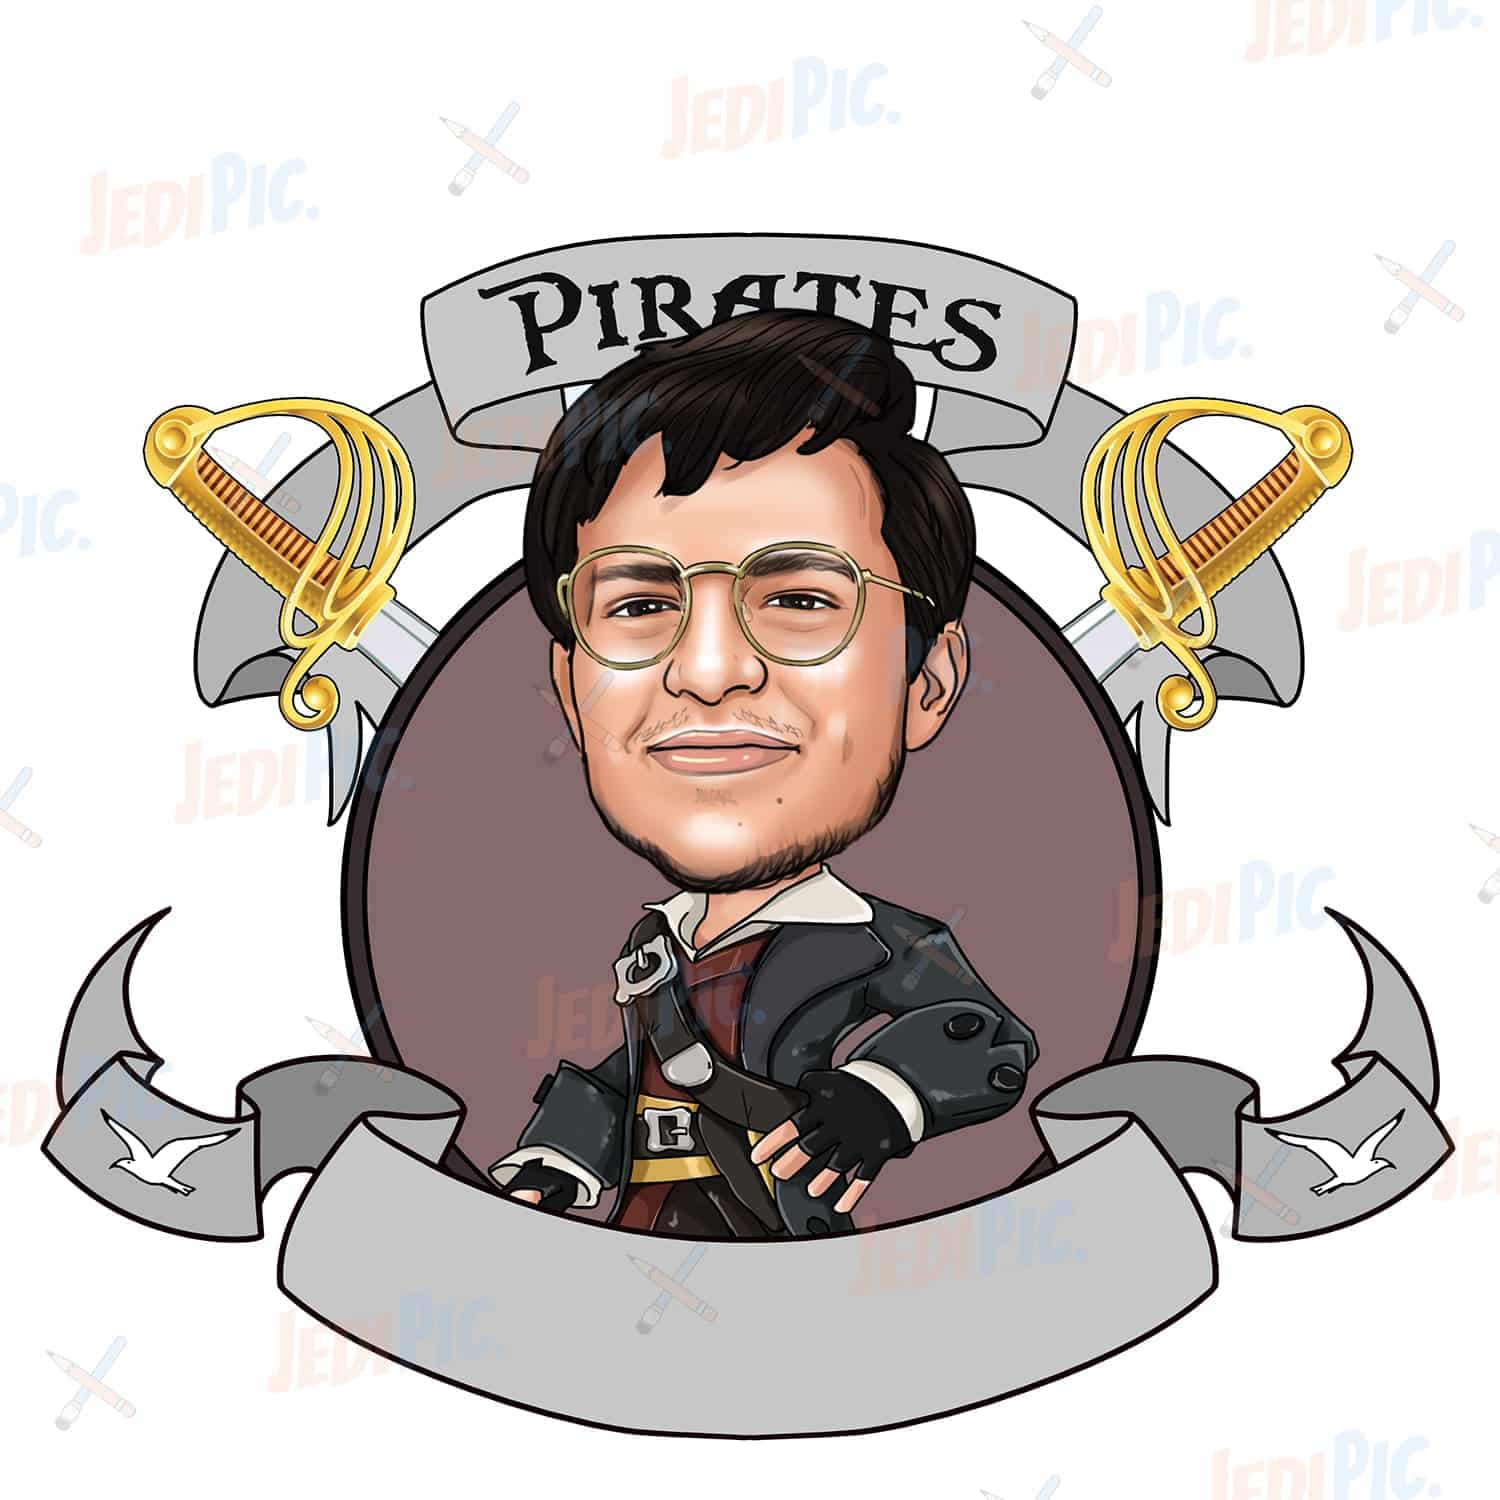 Pirate Cartoon Portrait in Color Style